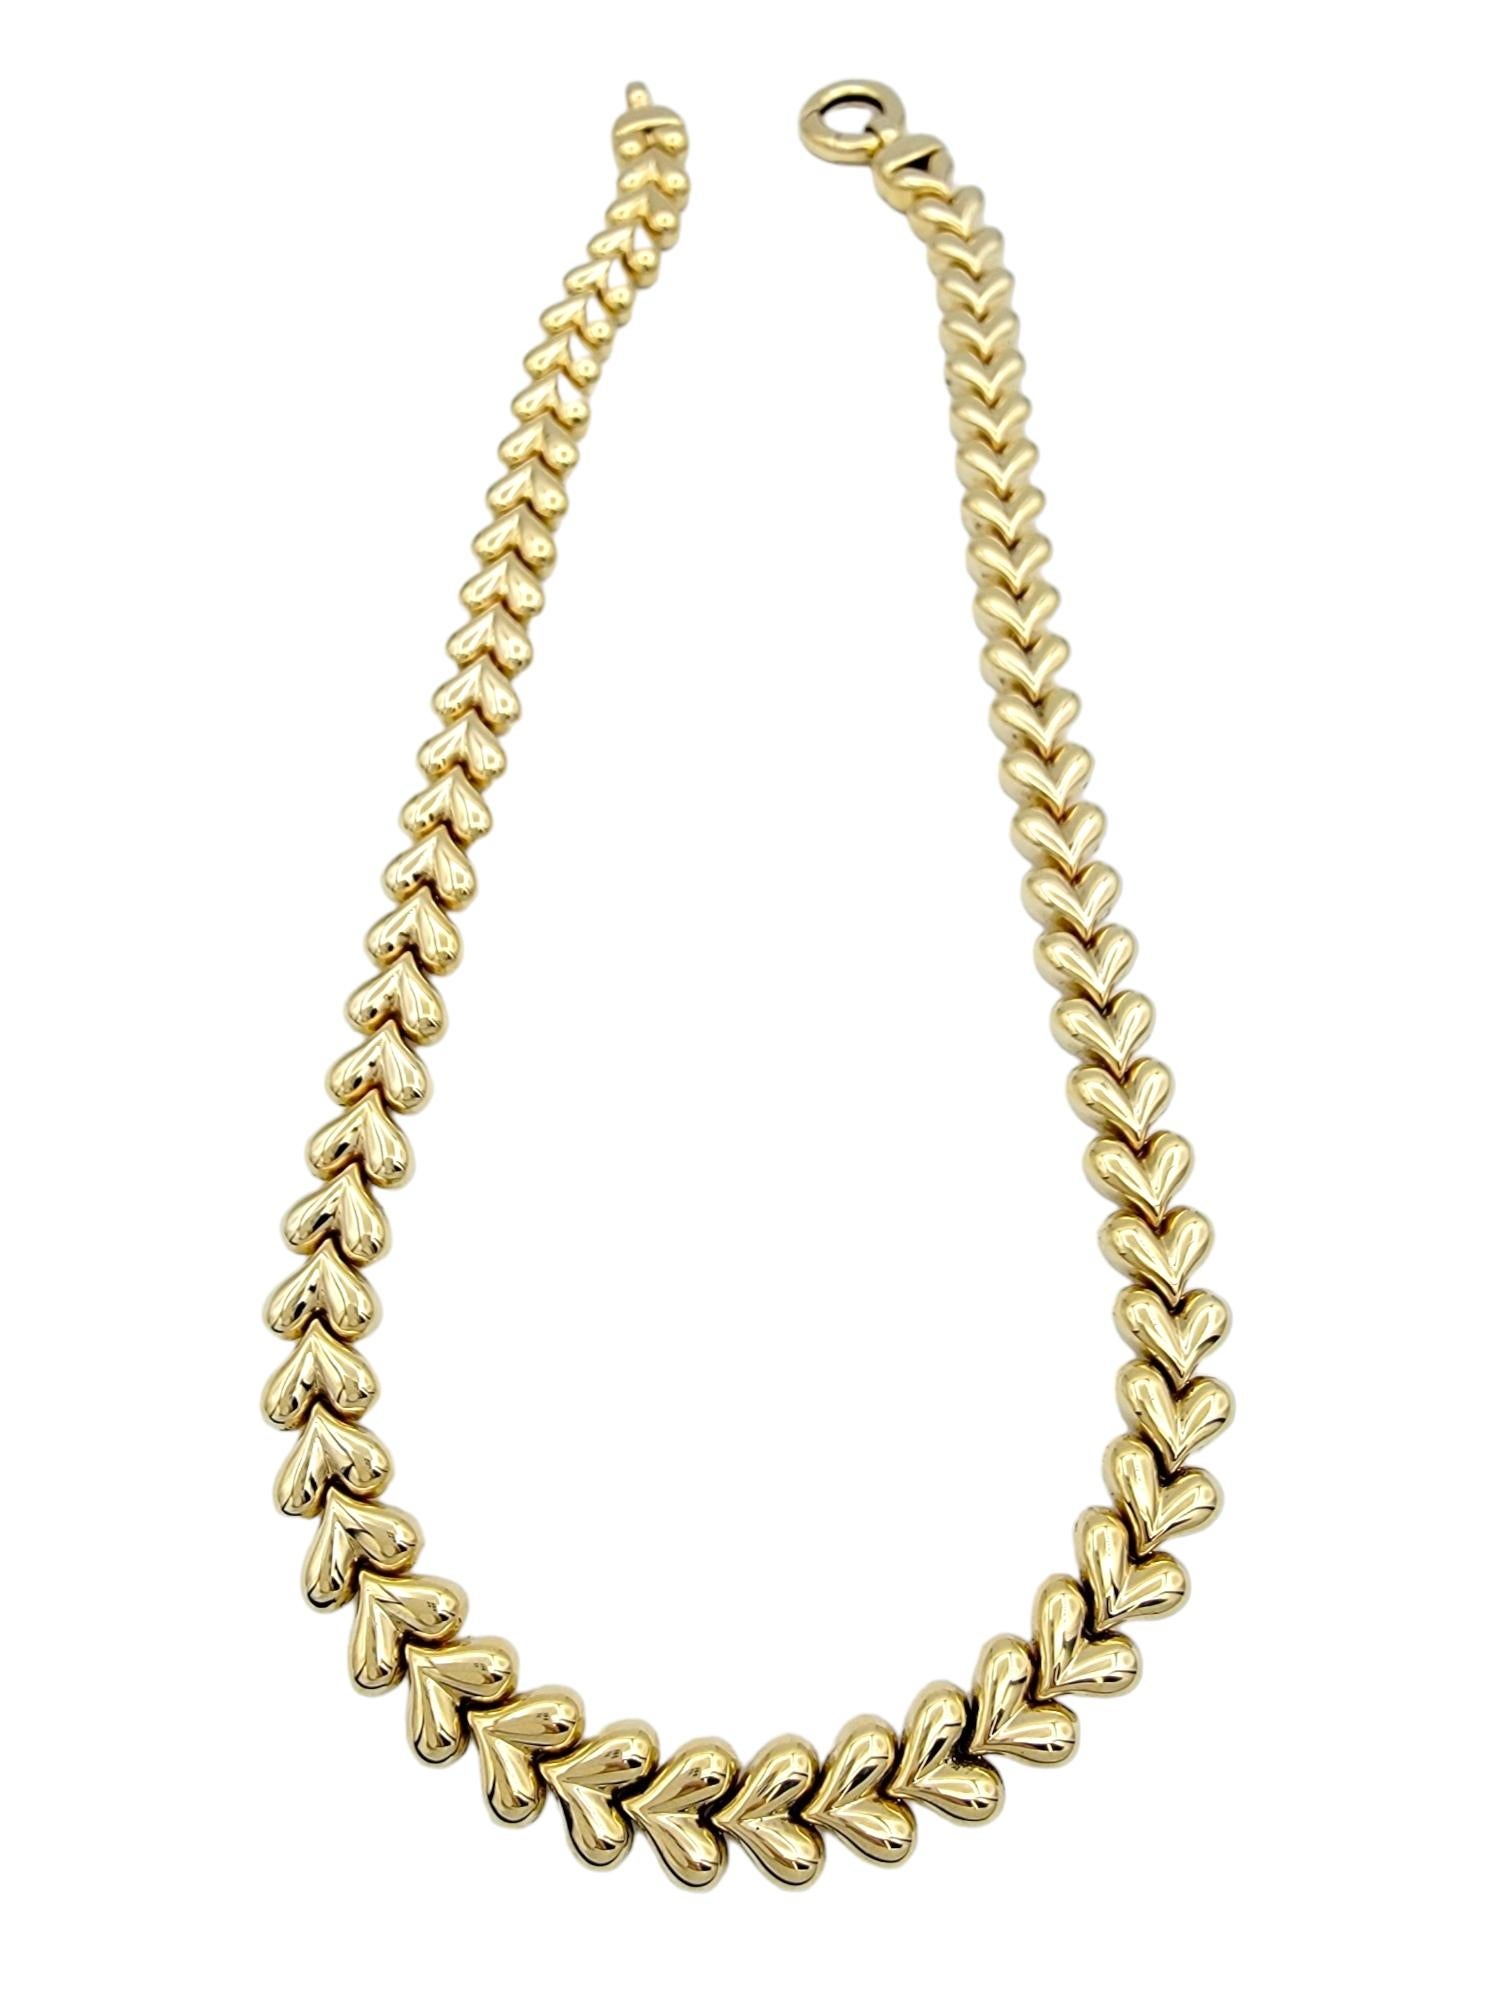 Chunky Heart Link Chain Necklace in Polished 14 Karat Yellow Gold In Good Condition For Sale In Scottsdale, AZ